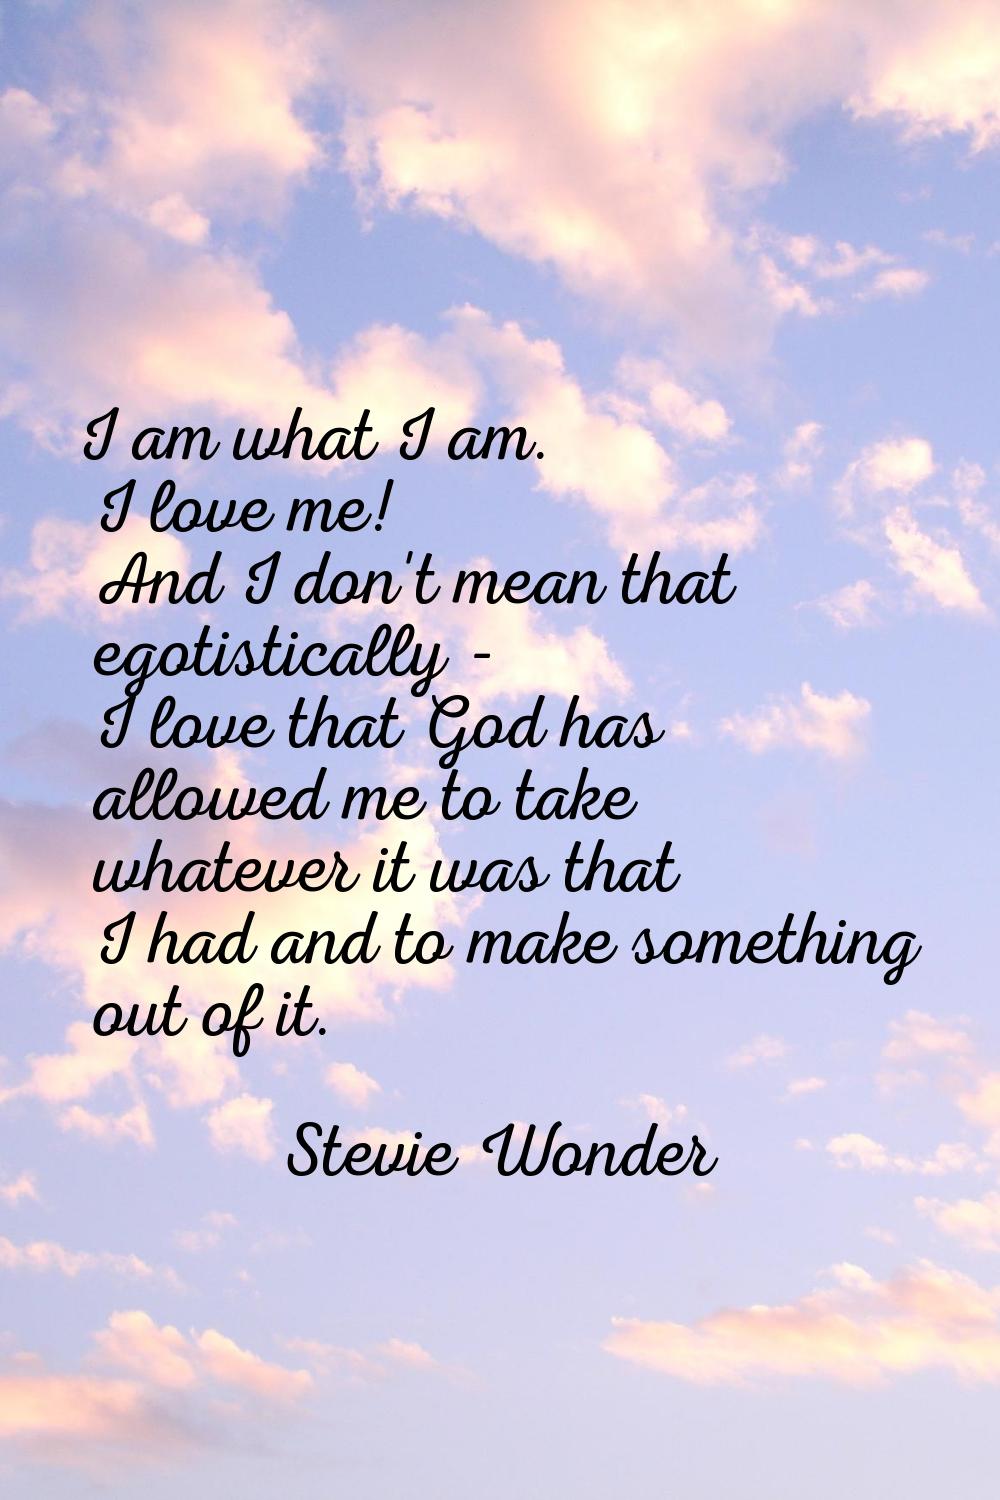 I am what I am. I love me! And I don't mean that egotistically - I love that God has allowed me to 